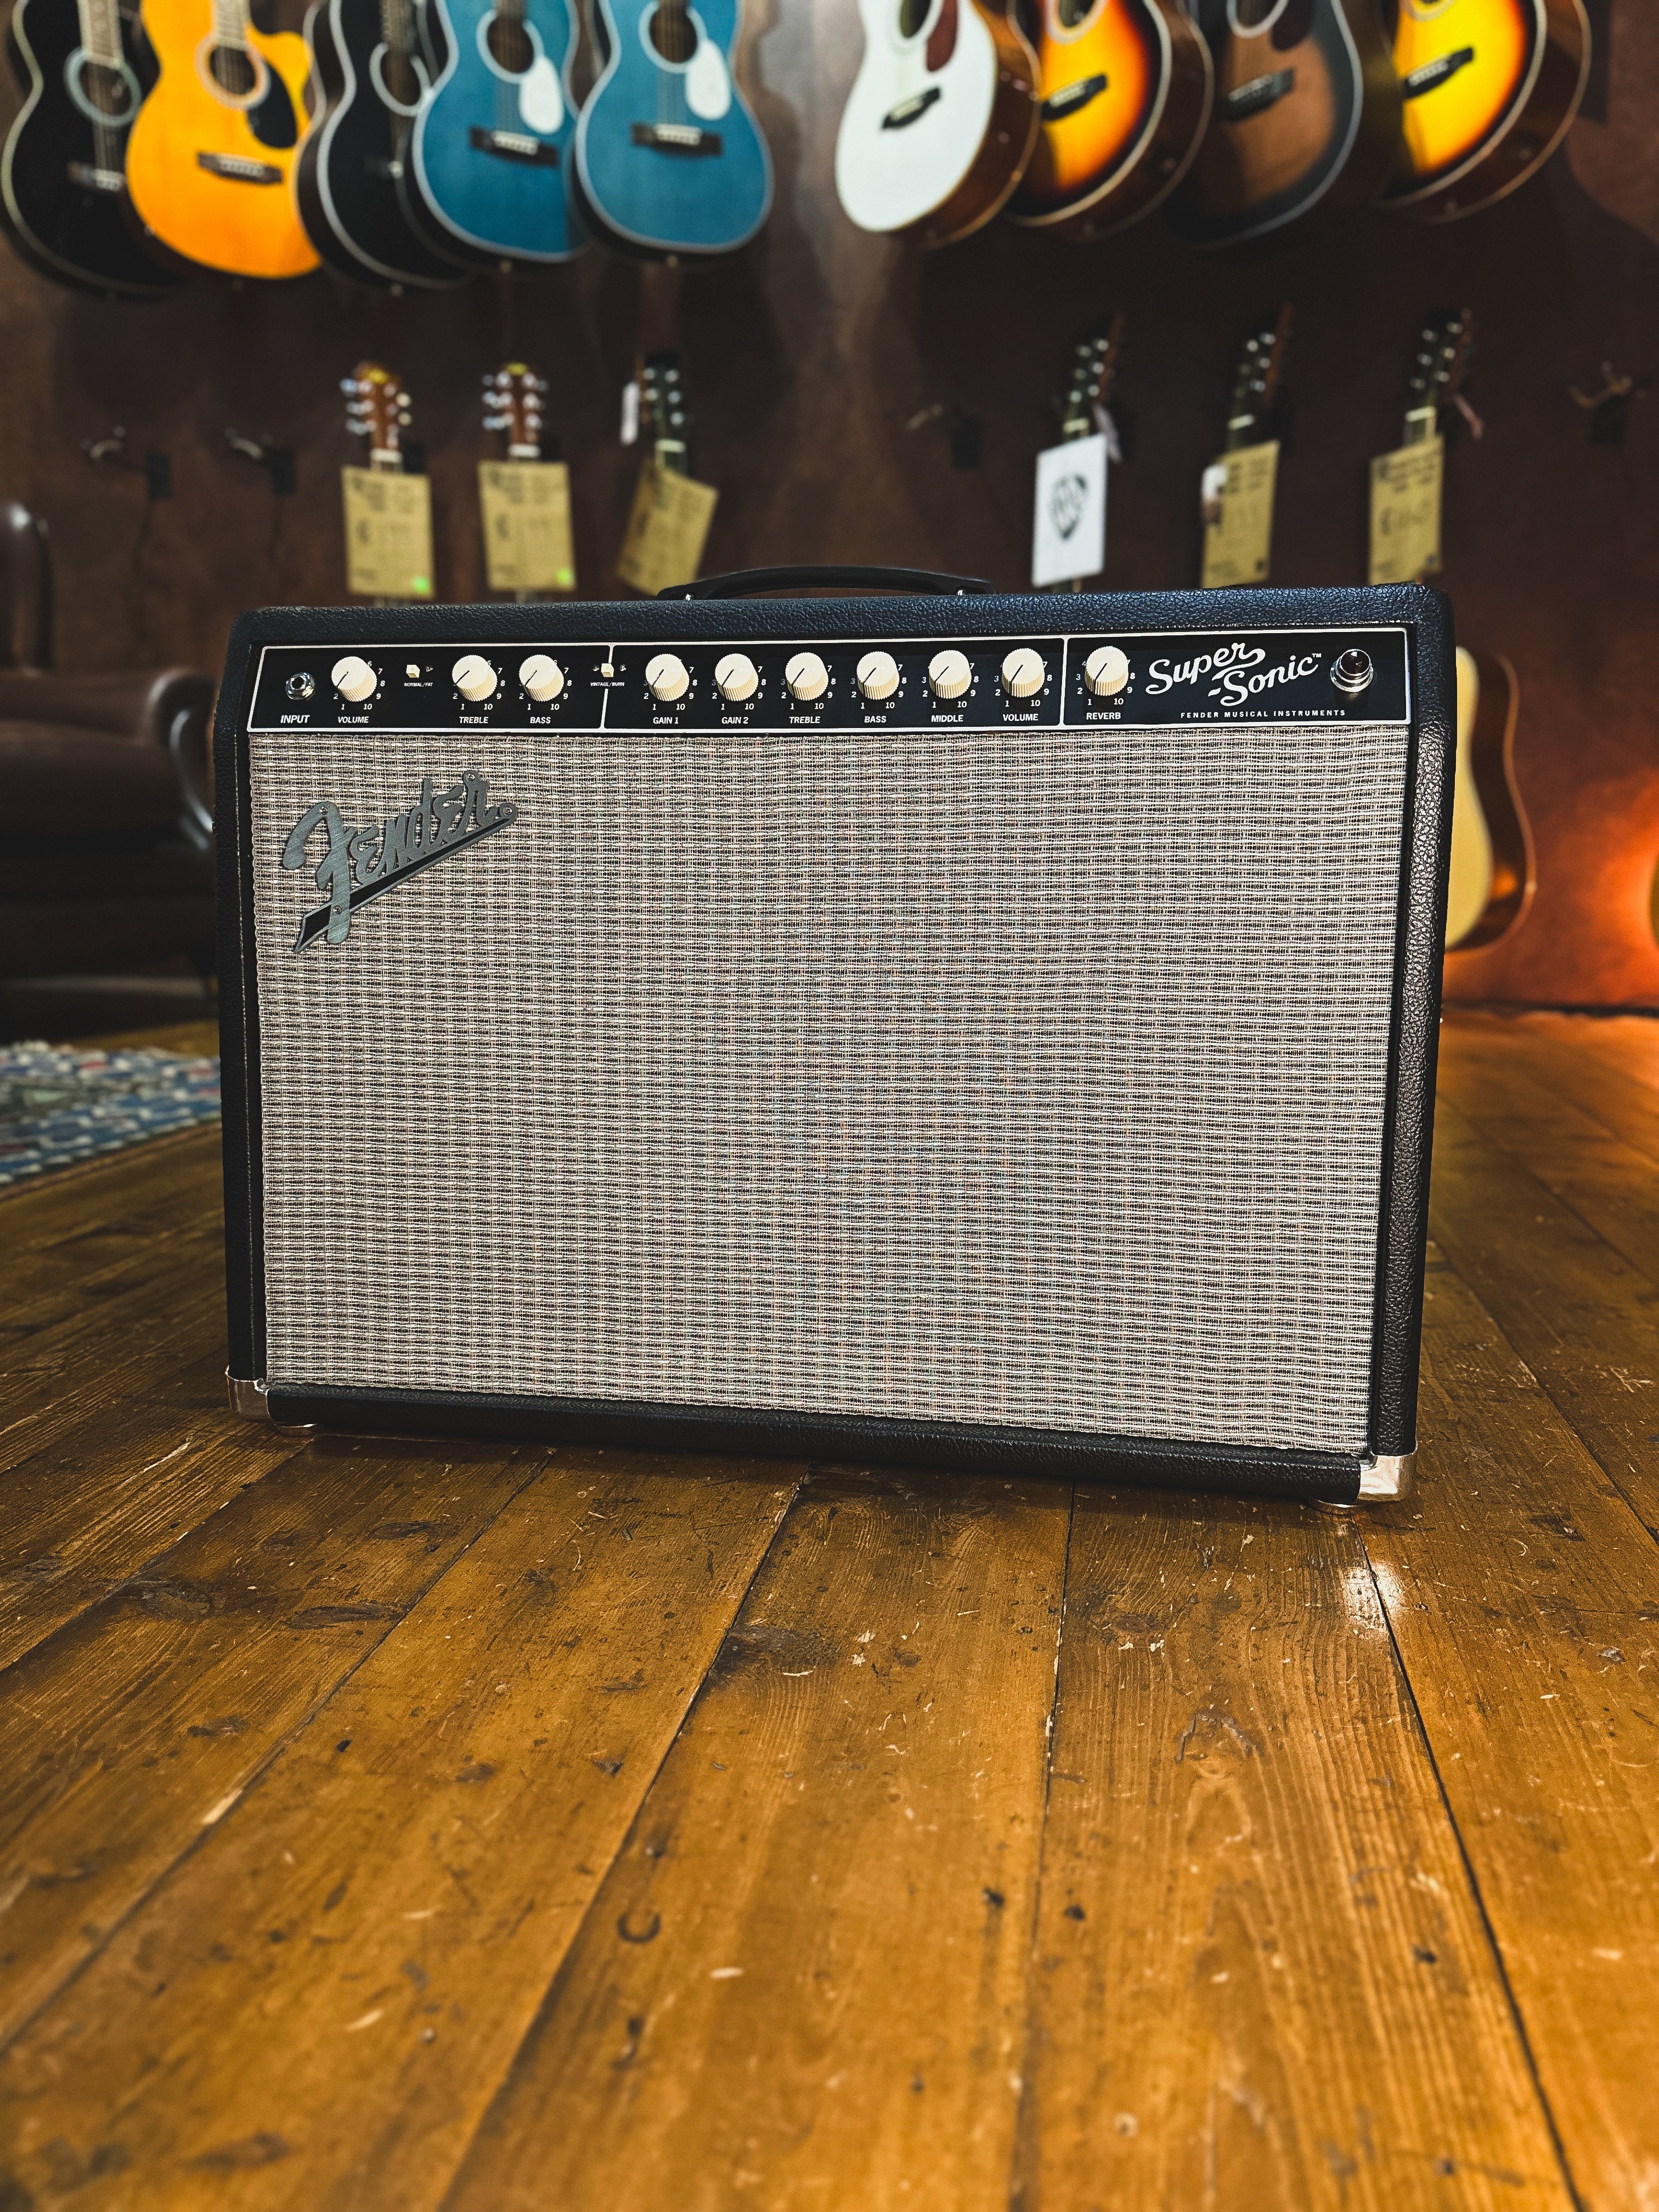 2013 Fender Supersonic 22 Amp w/ Footswitch